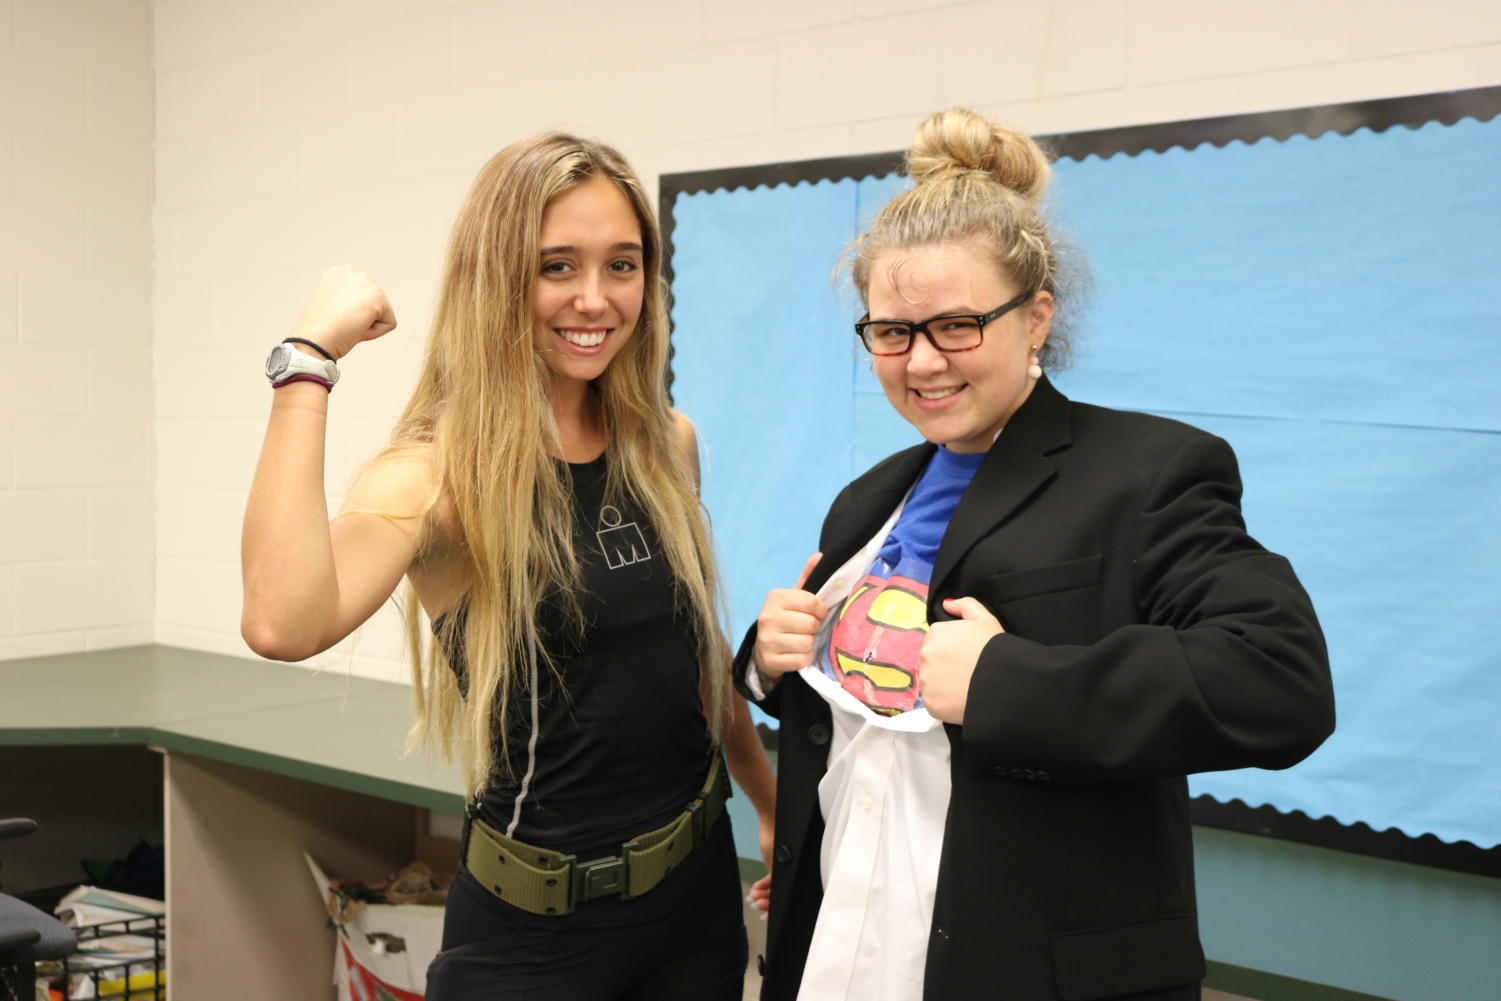 Homecoming+day+2+photo+gallery%3A+Superhero+Relay+Race